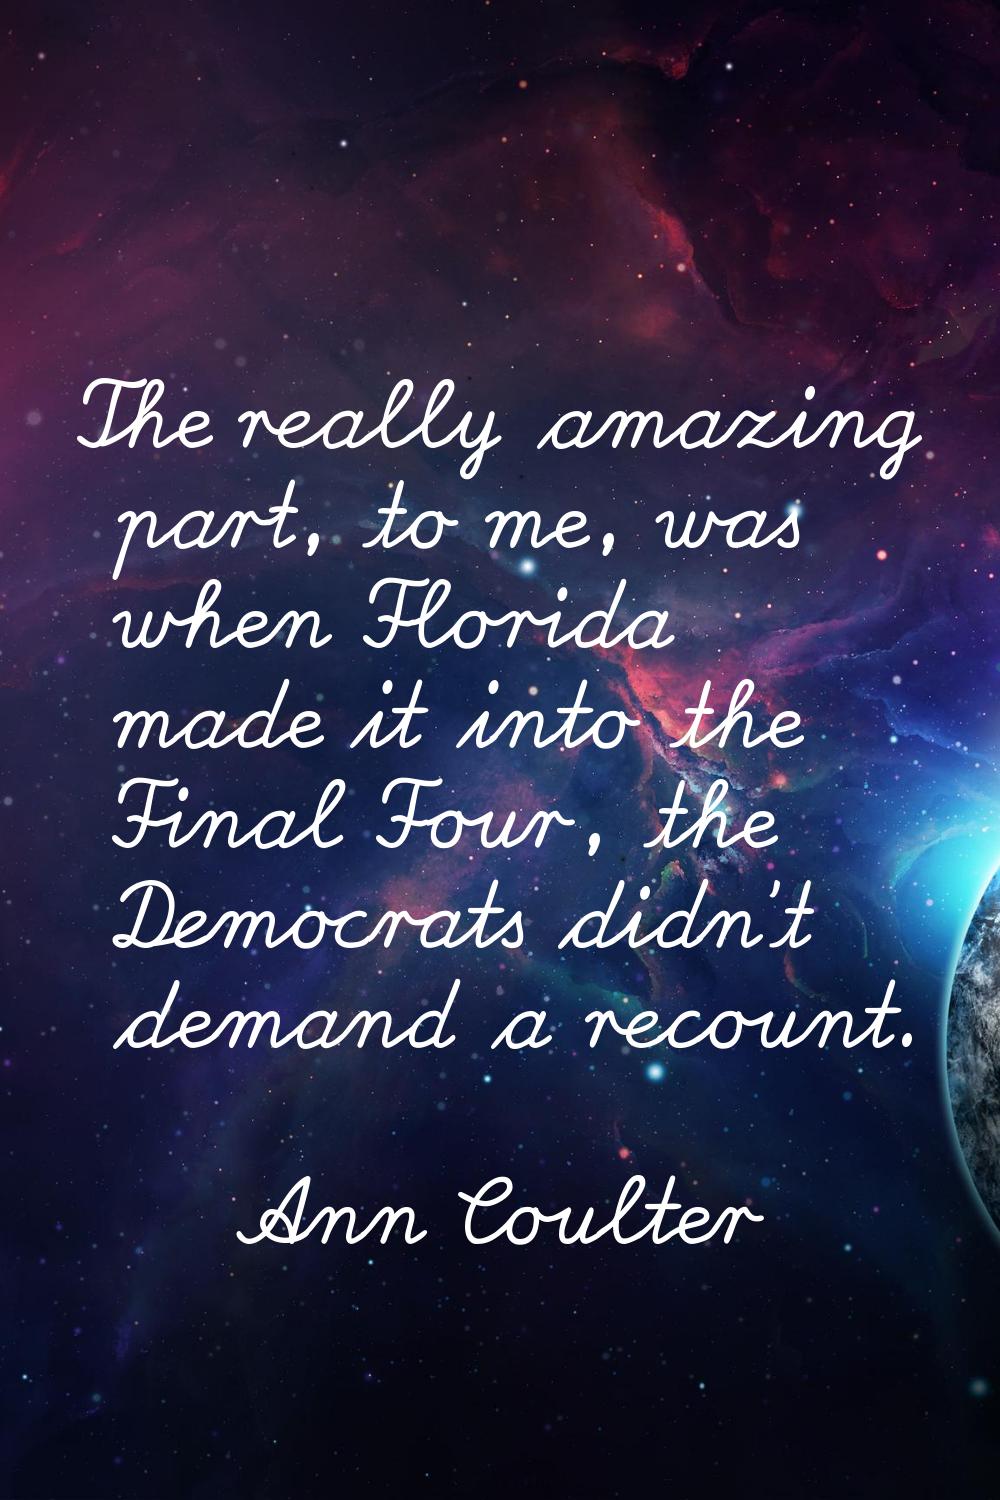 The really amazing part, to me, was when Florida made it into the Final Four, the Democrats didn't 